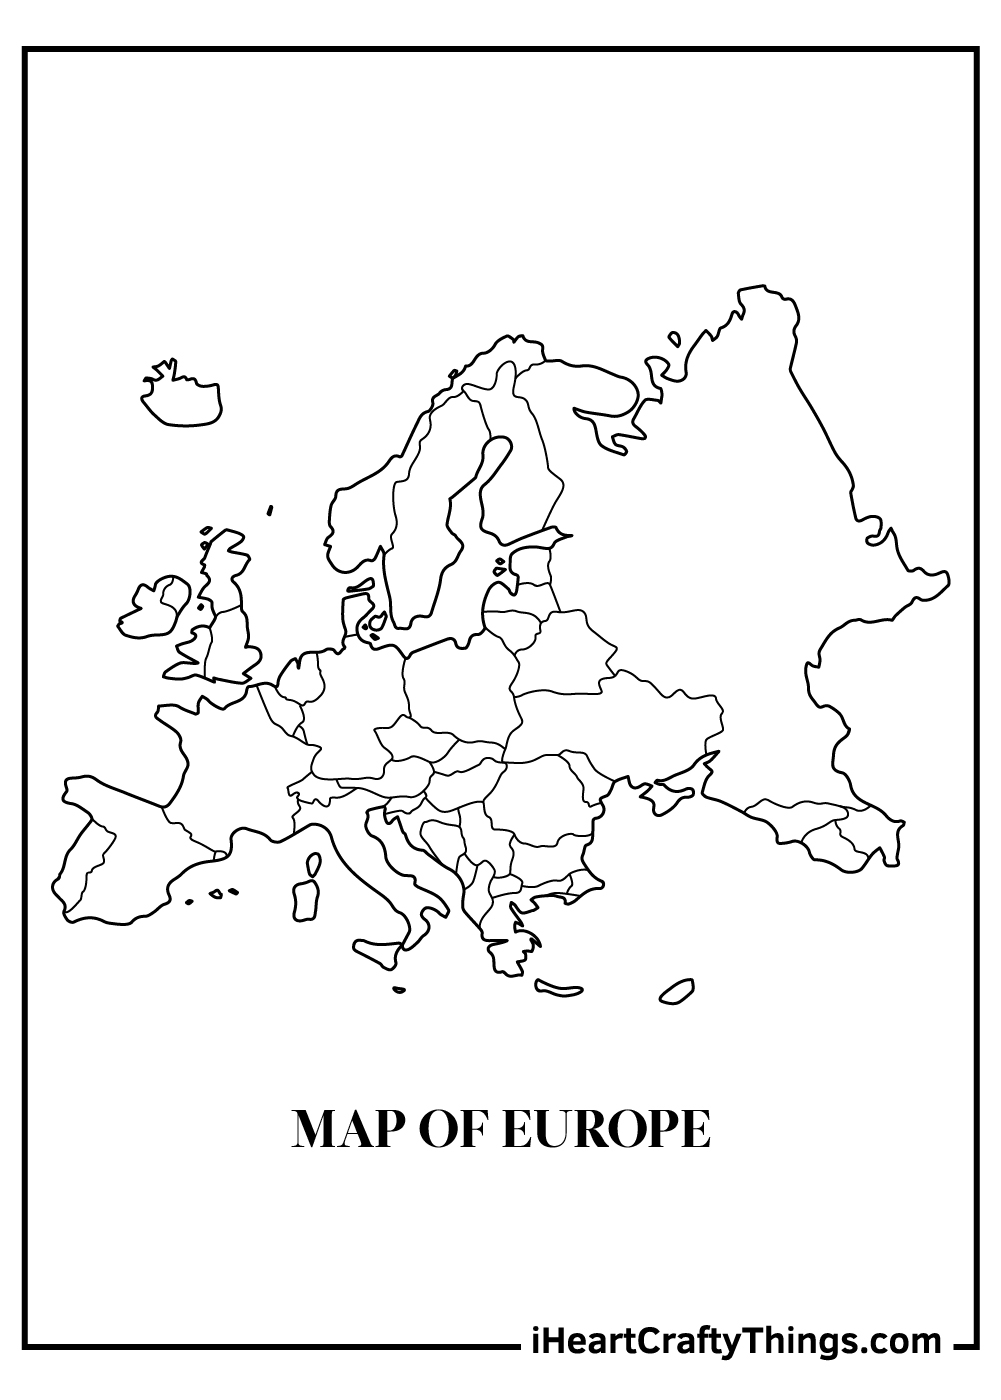 Europe and Asia map coloring pages free download